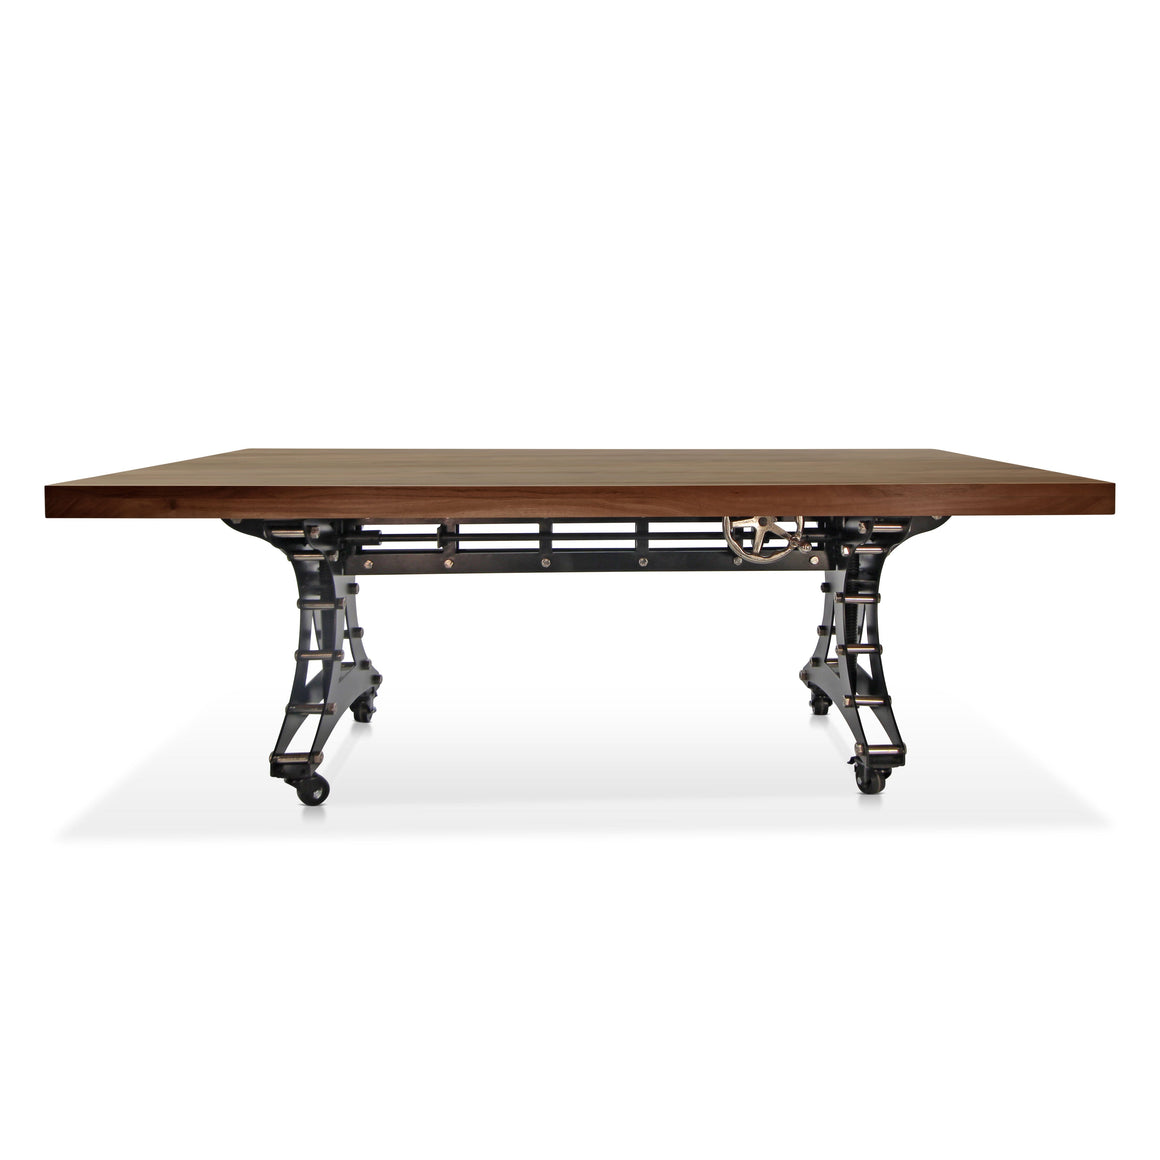 Longeron Industrial Dining Table Adjustable Casters Walnut Dining Table Rustic Deco